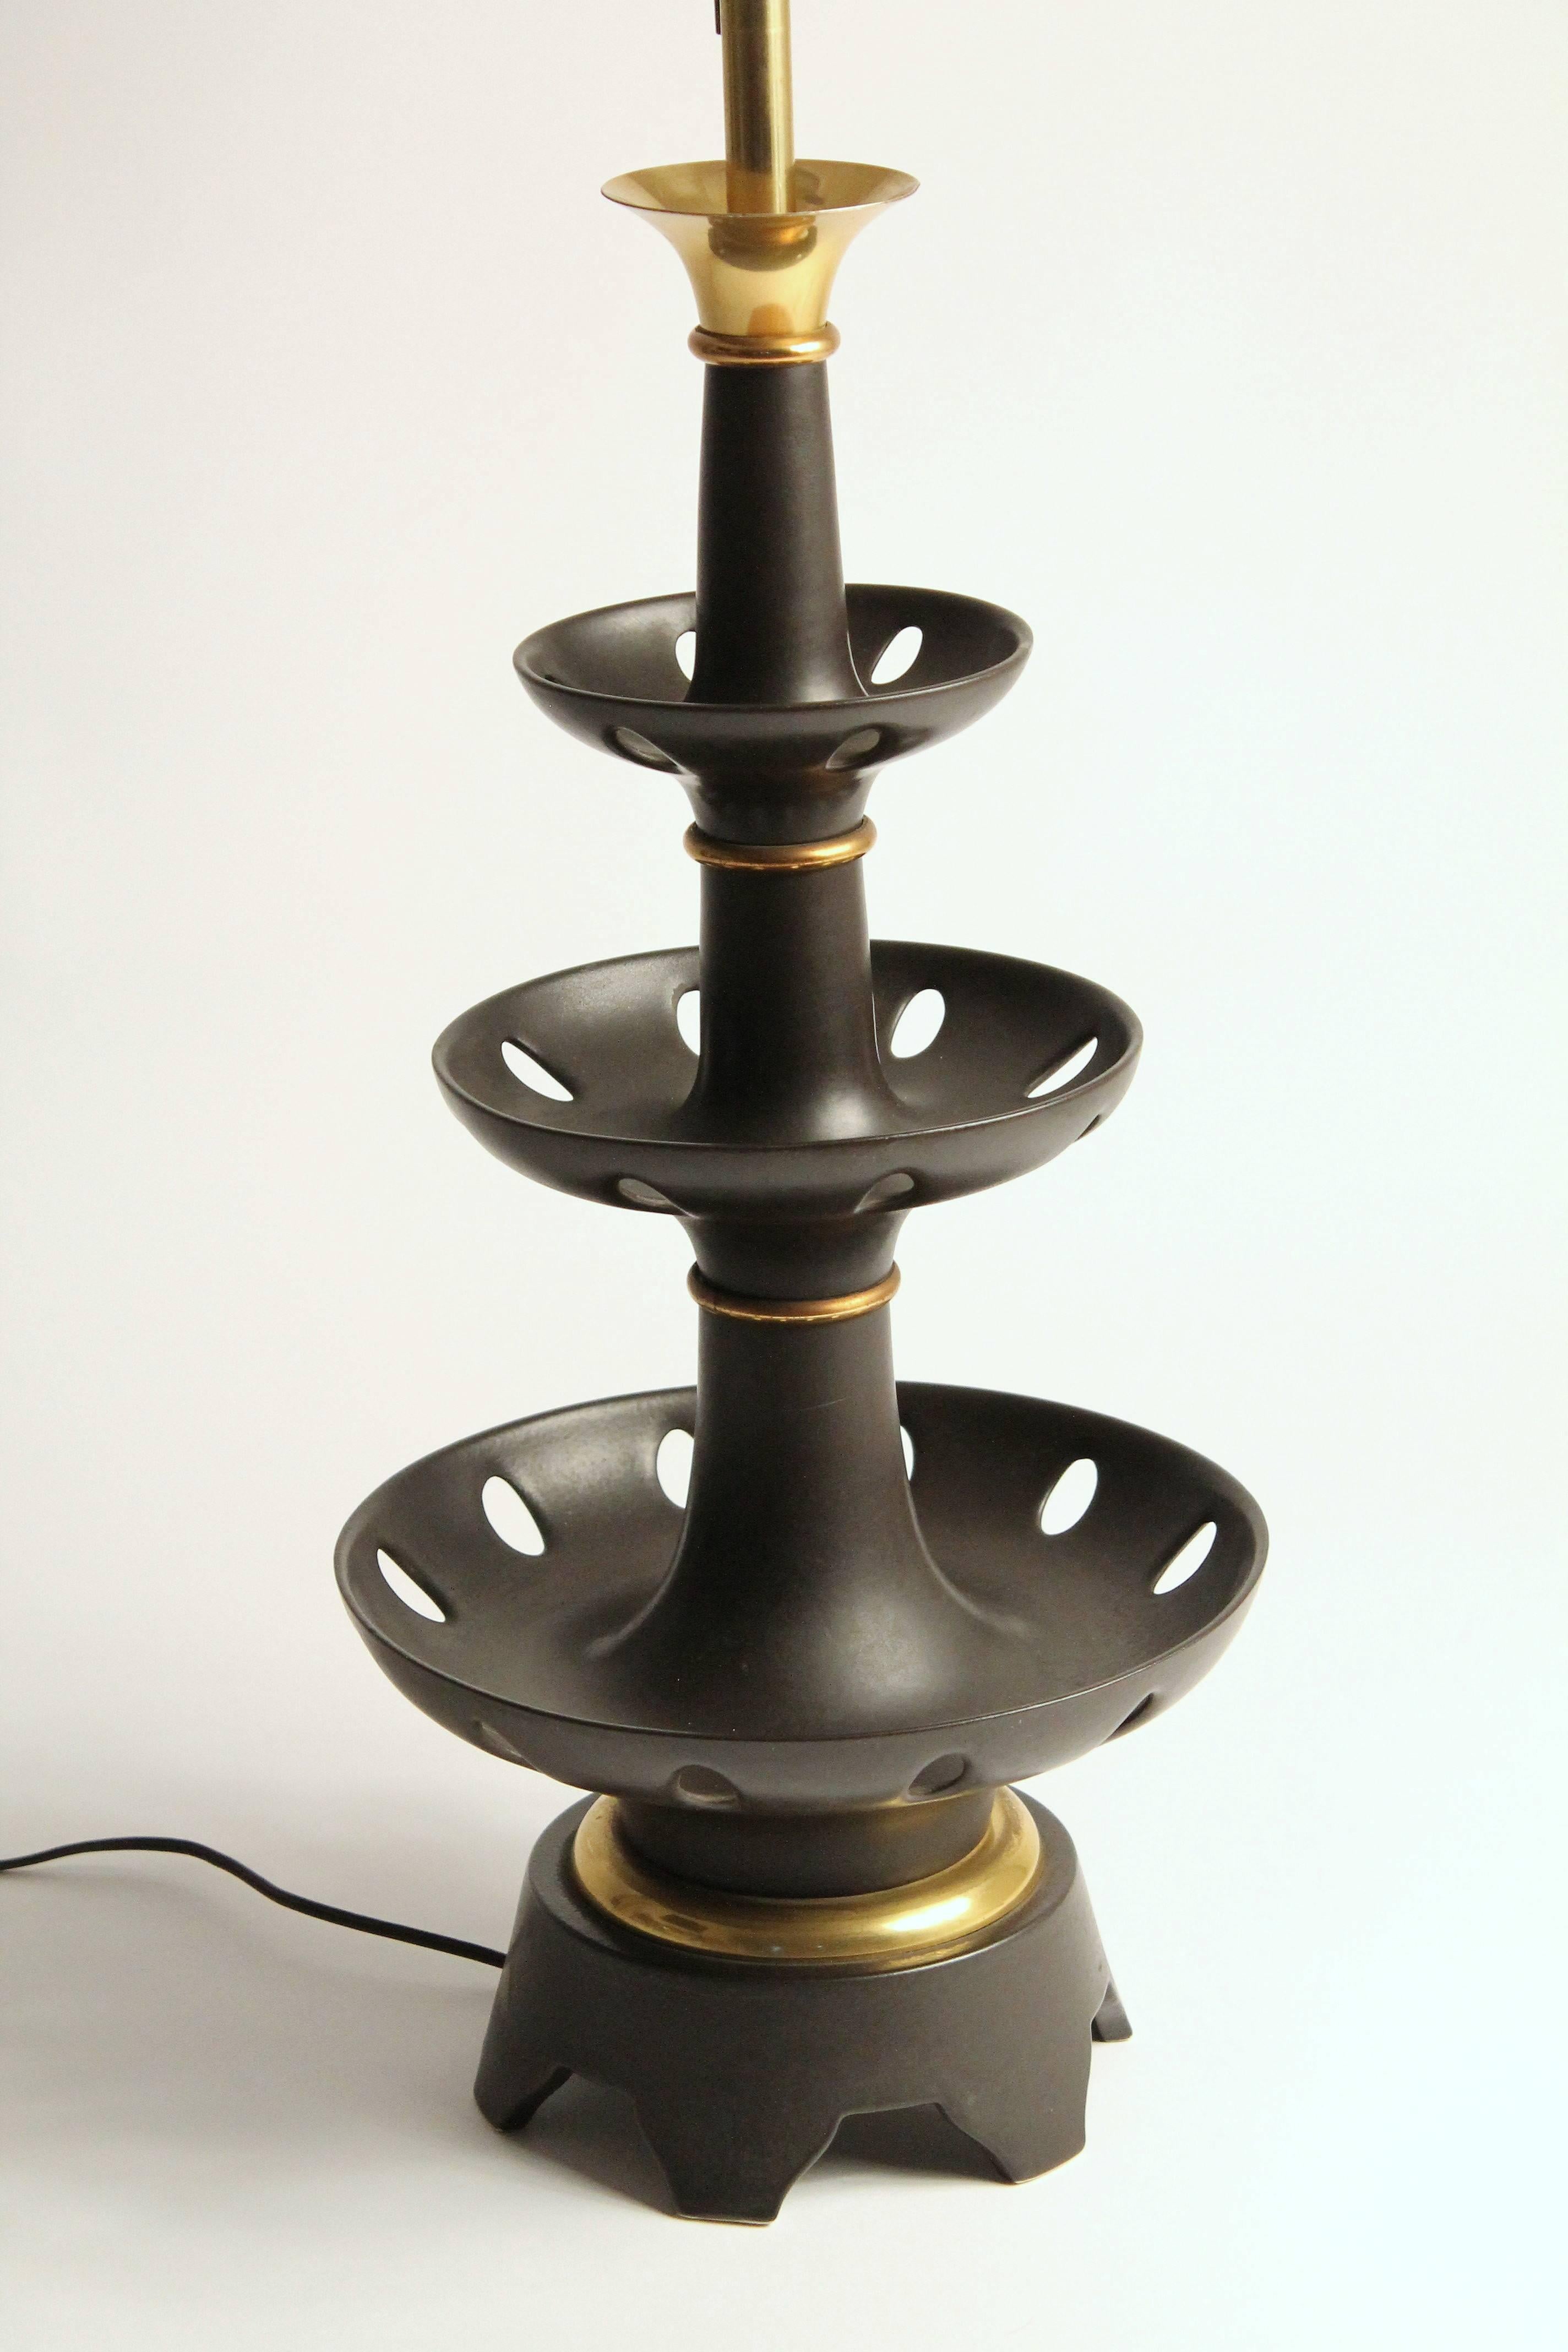 Mid-20th Century G. Thurston Porcelain Three-Tiered Table Lamp, Lightolier, 1950s, USA For Sale